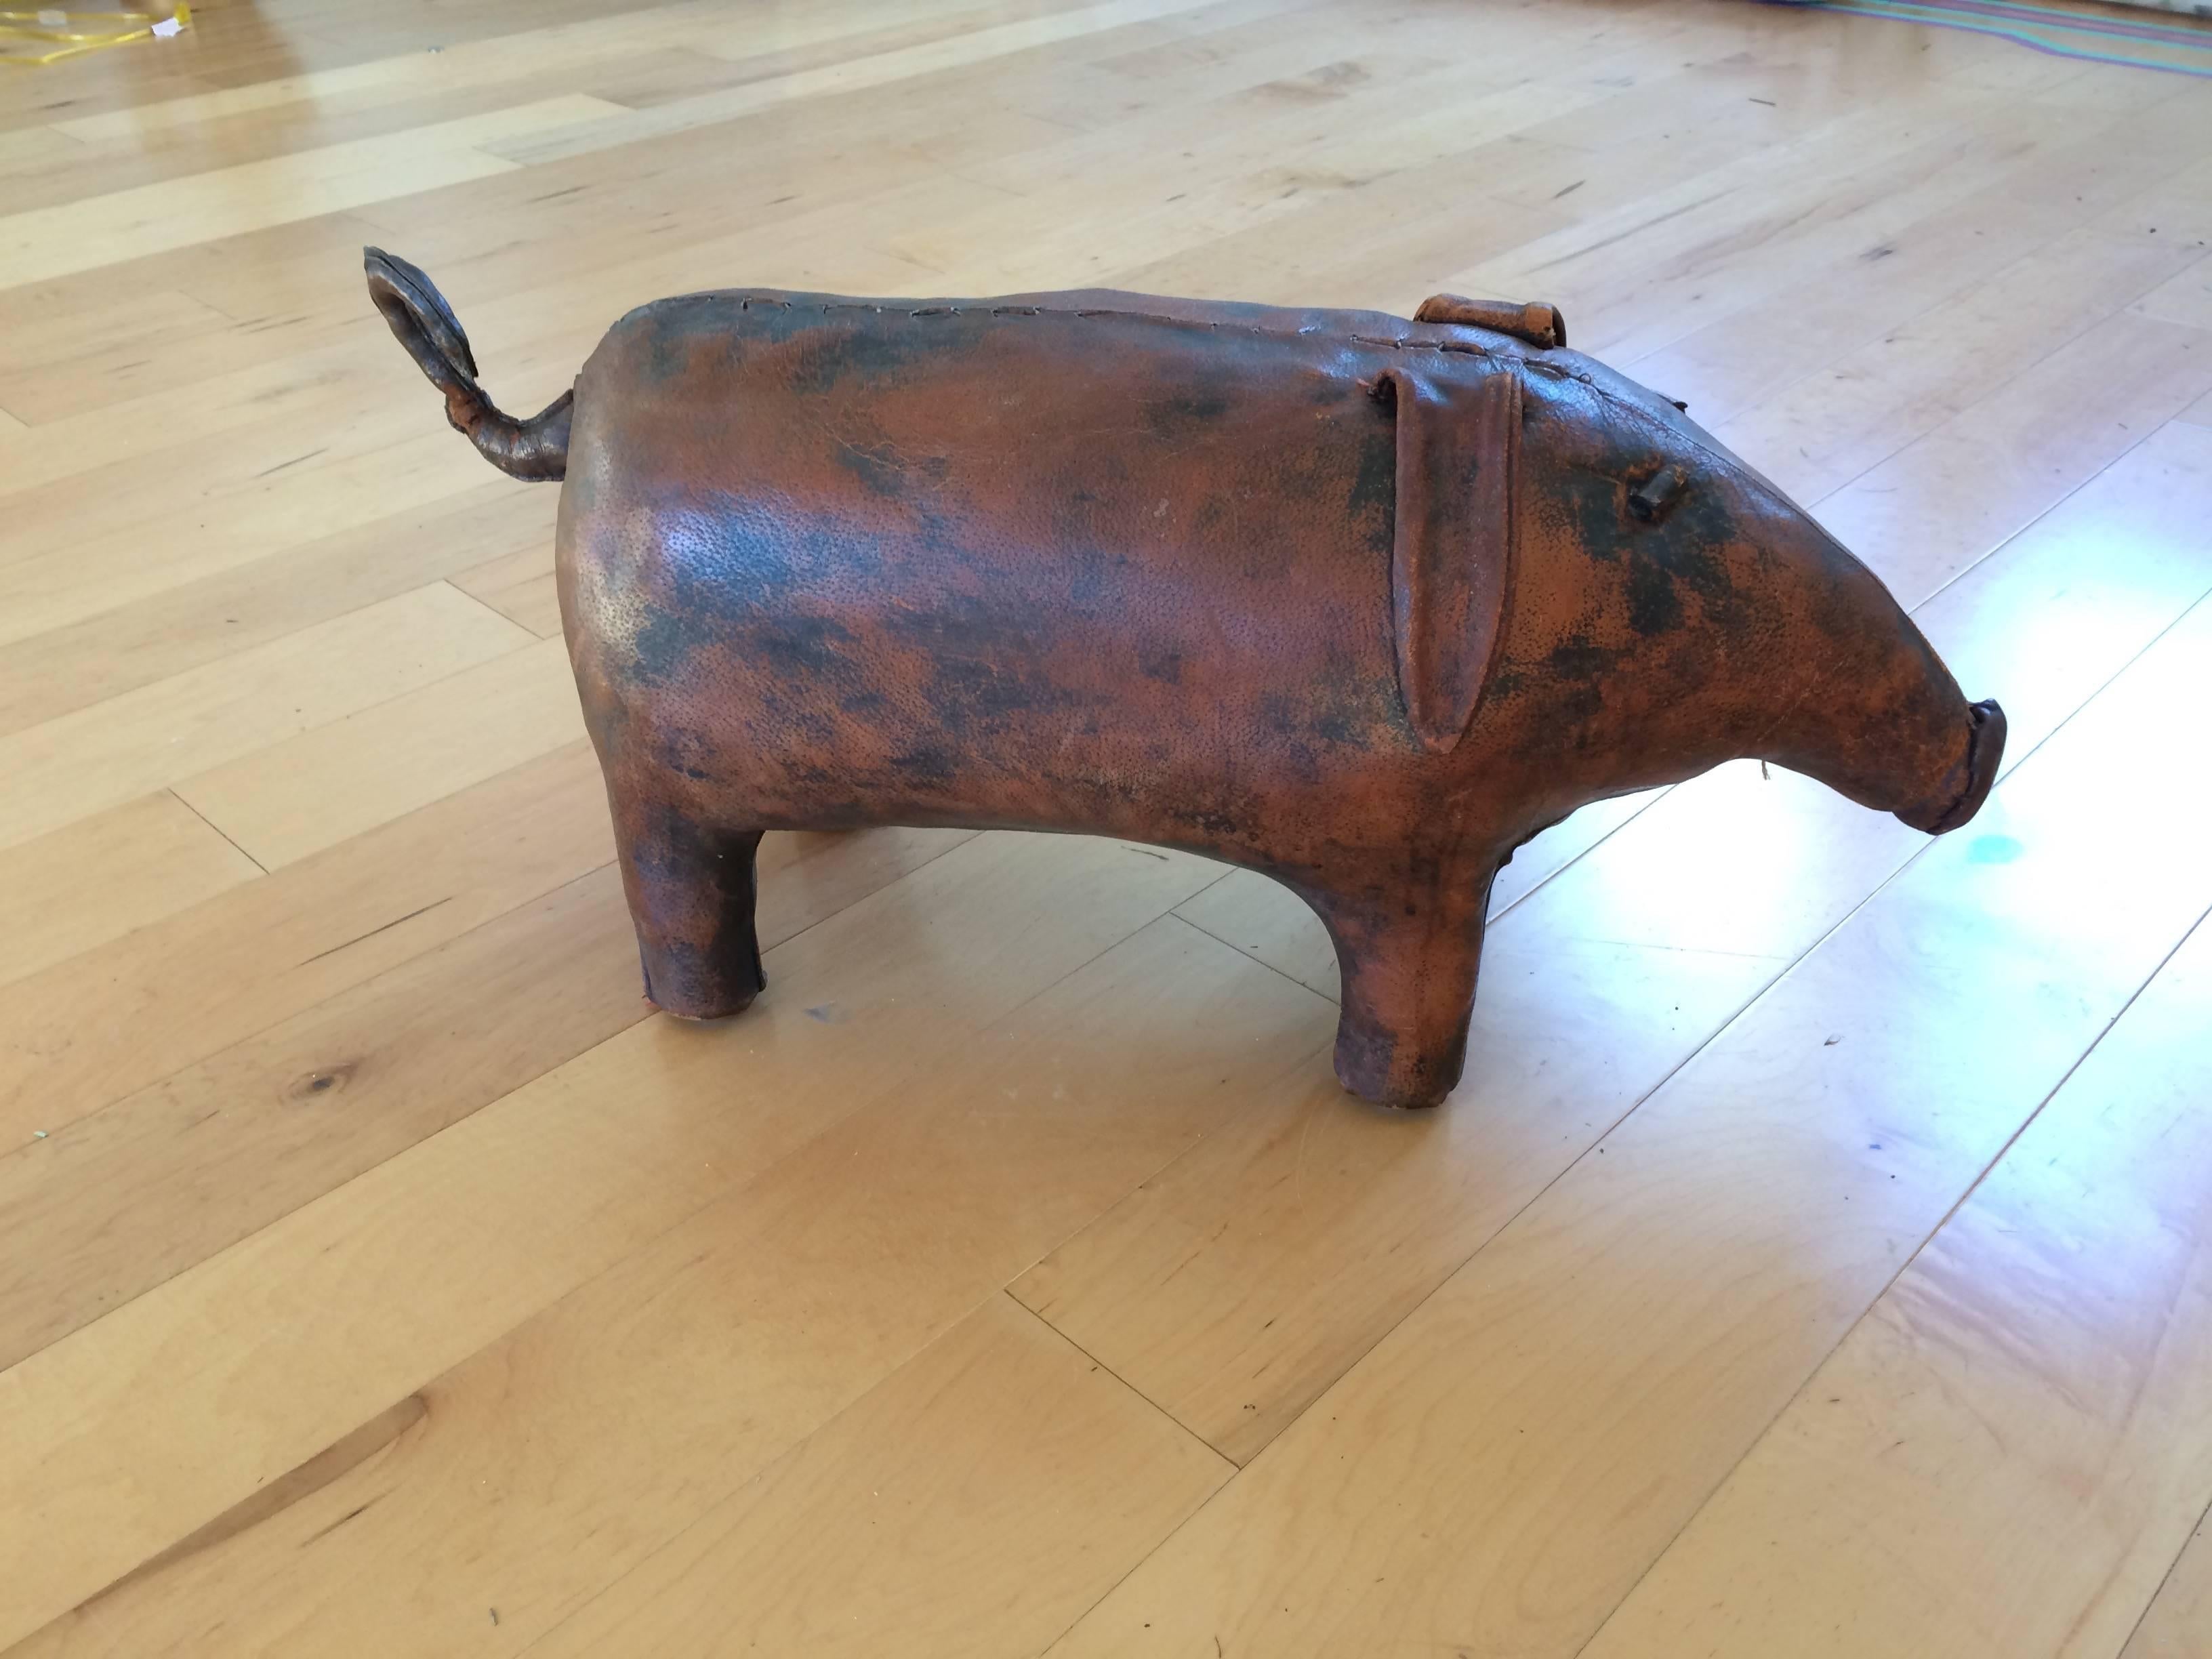 Irresistible distressed leather vintage pig ottoman by the famous Abercrombie & Fitch Co. Wonderful aged patina to the leather.